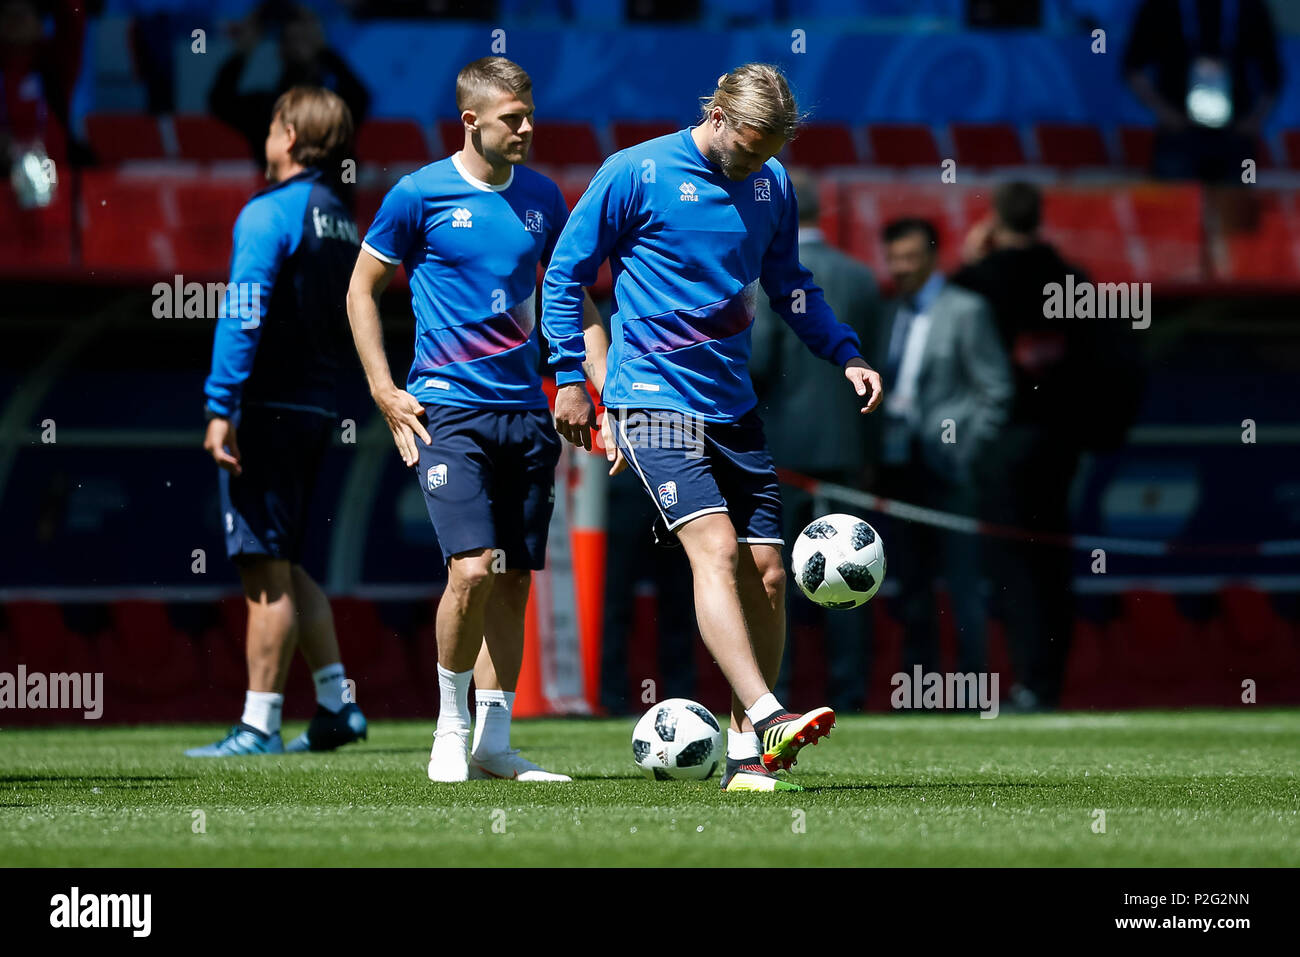 Moscow, Russia. 15th June 2018. Birkir Bjarnason of Iceland during an Iceland training session, prior to their 2018 FIFA World Cup Group D match against Argentina, at Spartak Stadium on June 15th 2018 in Moscow, Russia. Credit: PHC Images/Alamy Live News Stock Photo